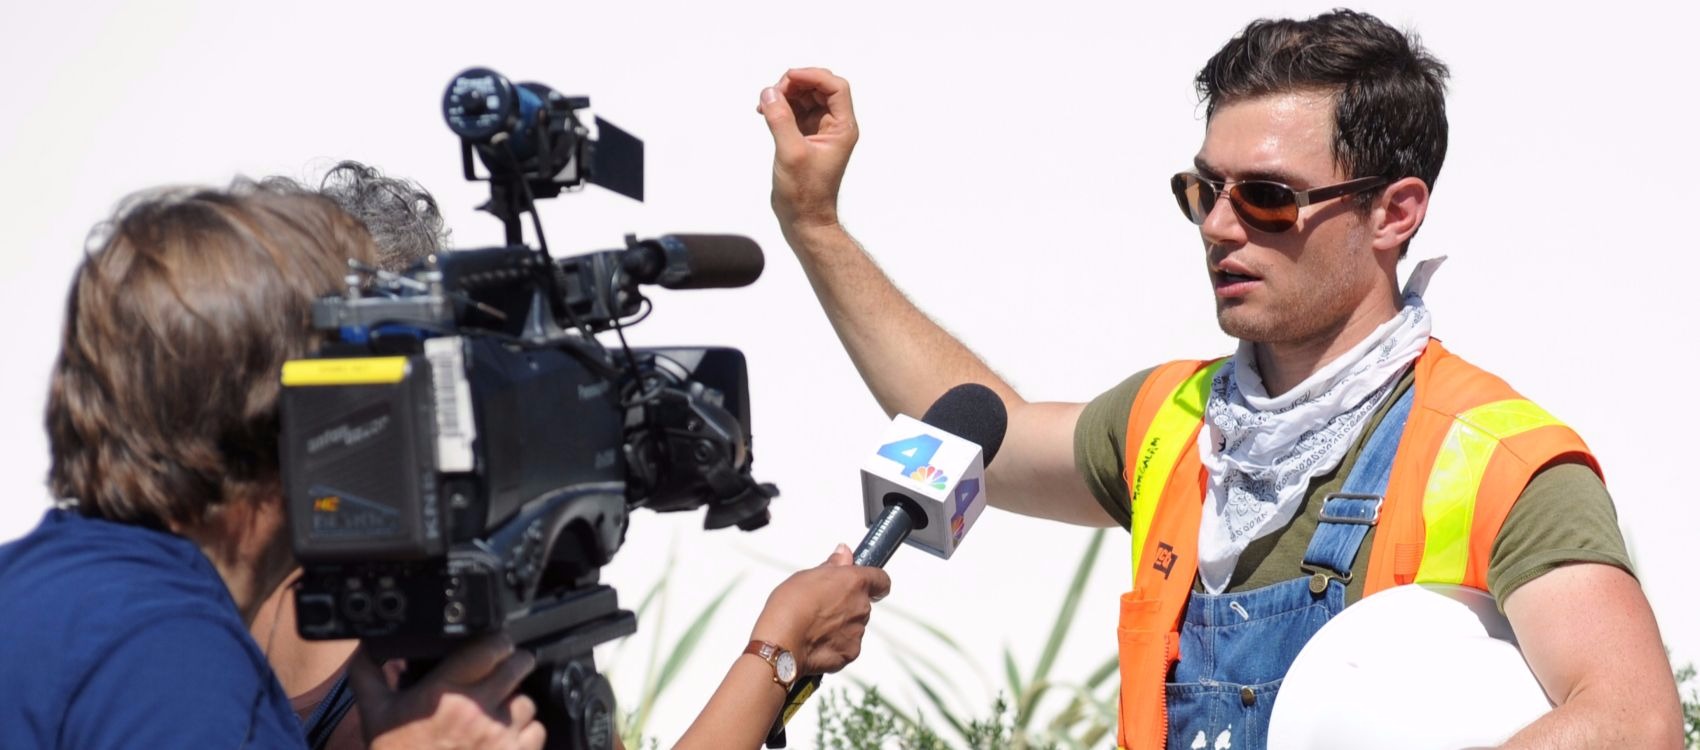 Photo of a young man wearing construction clothing, safety glasses, and carrying a hard hat under his arm, speaking to a TV reporter holding a microphone and a cameraman operating a large camera on a tripod. The young man is a competitor on Team Orange County in the U.S. Department of Energy Solar Decathlon 2015.